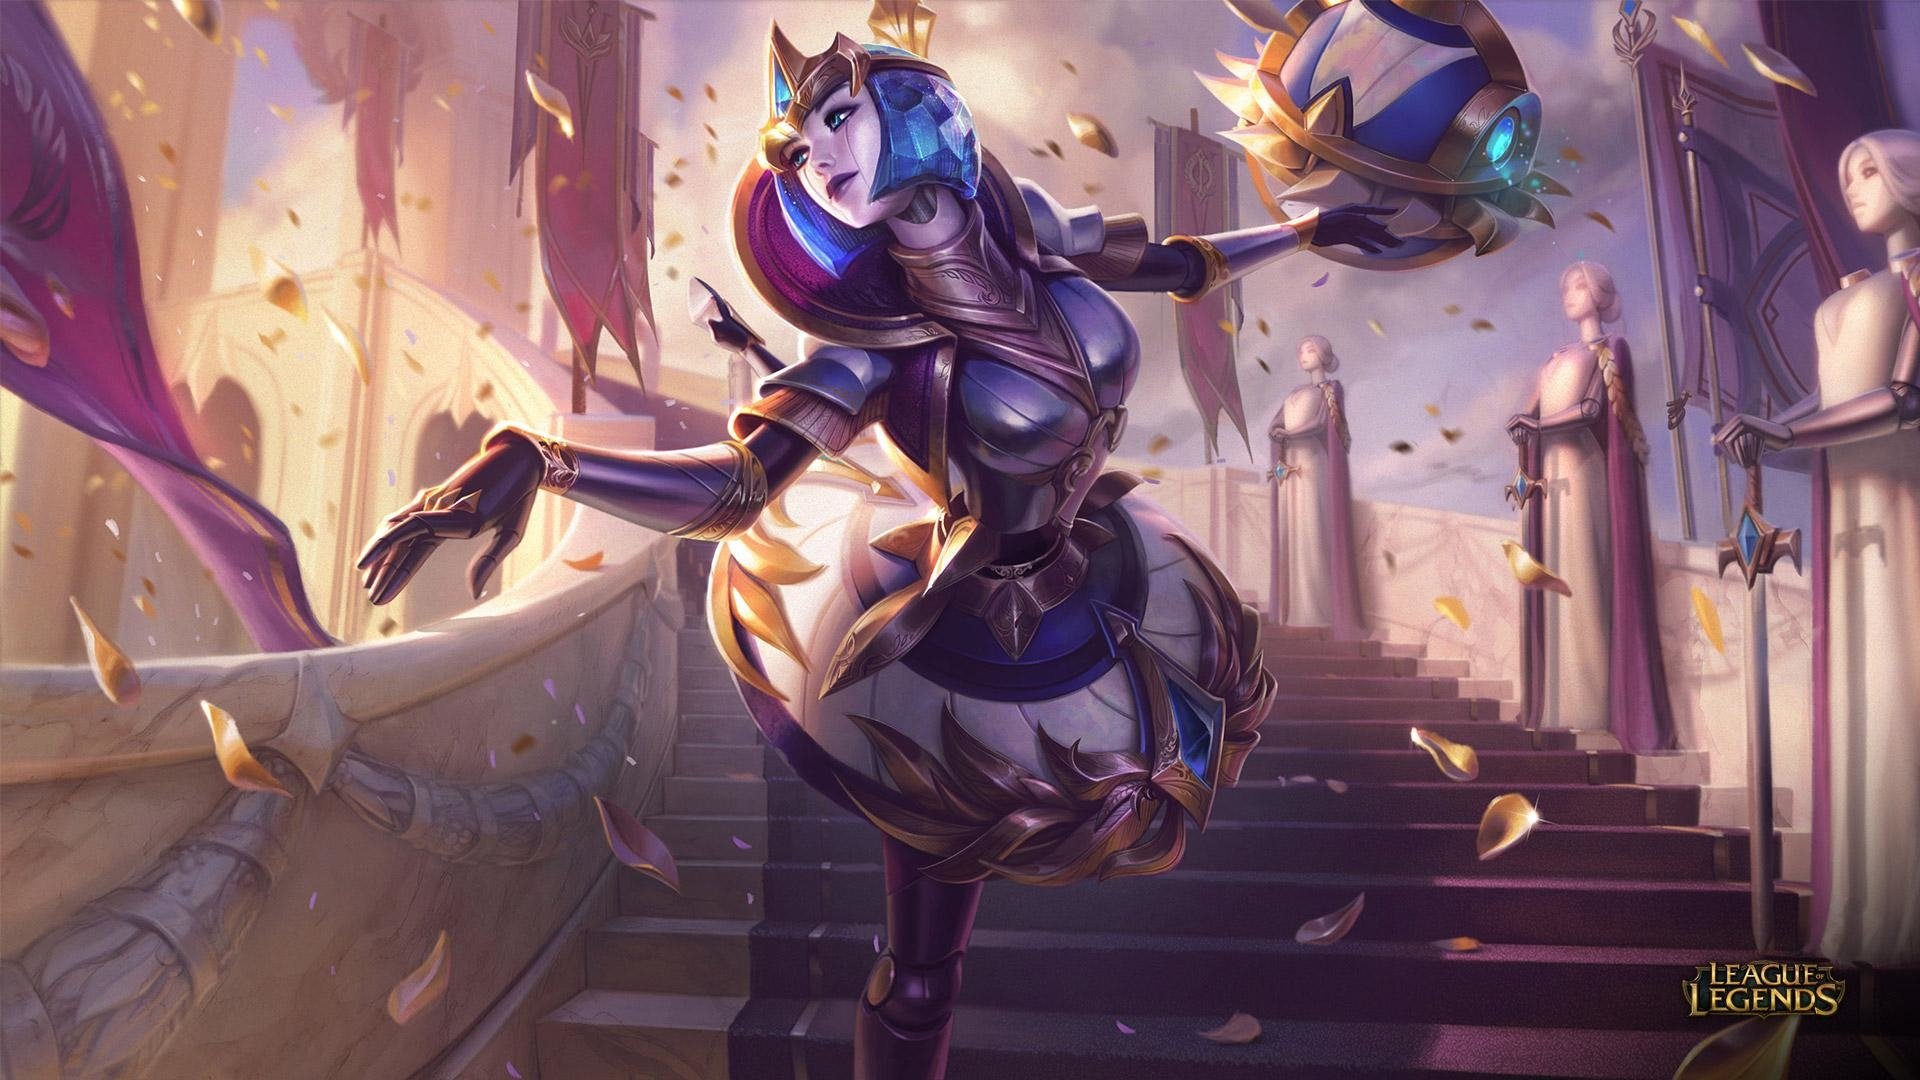 Jhin, Orianna, And Shen Were The Highest Winrate Champions During League Of Legends Worlds 2020